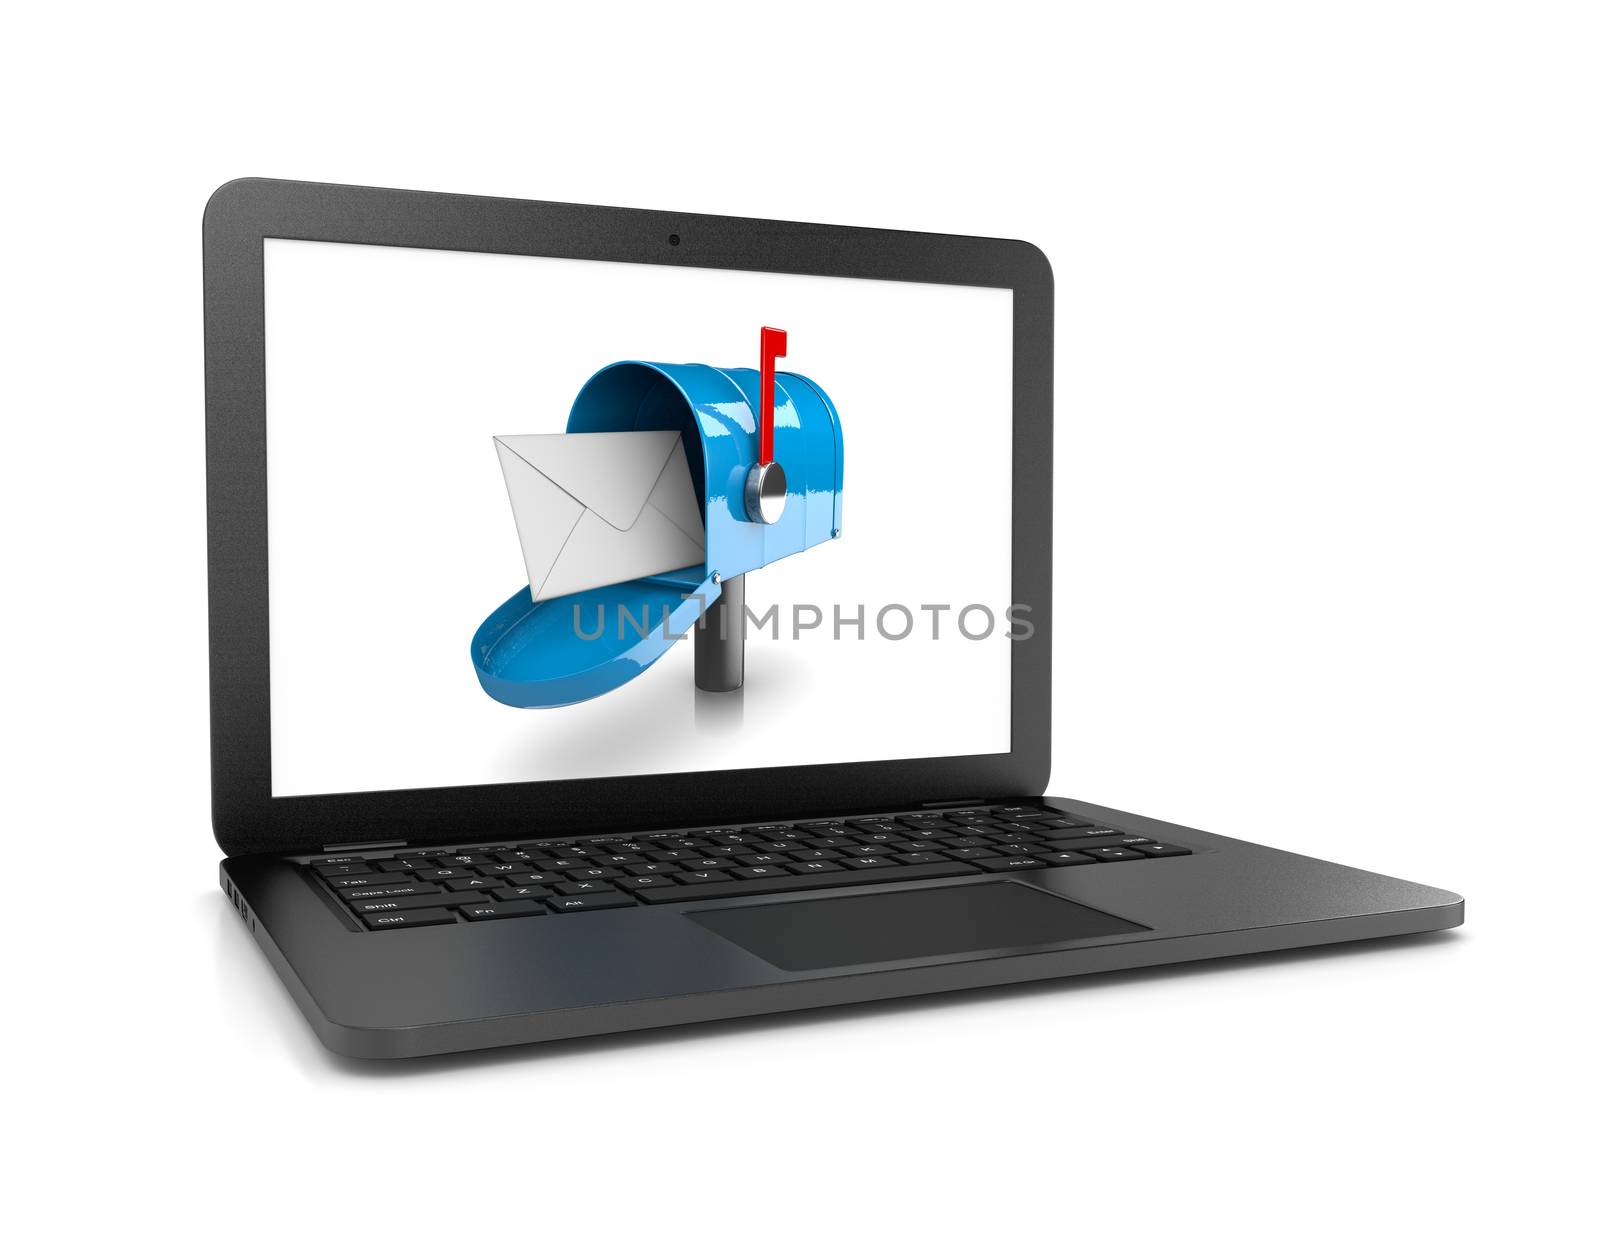 Black Laptop Computer with Blue Mailbox on the Screen 3D Illustration on White